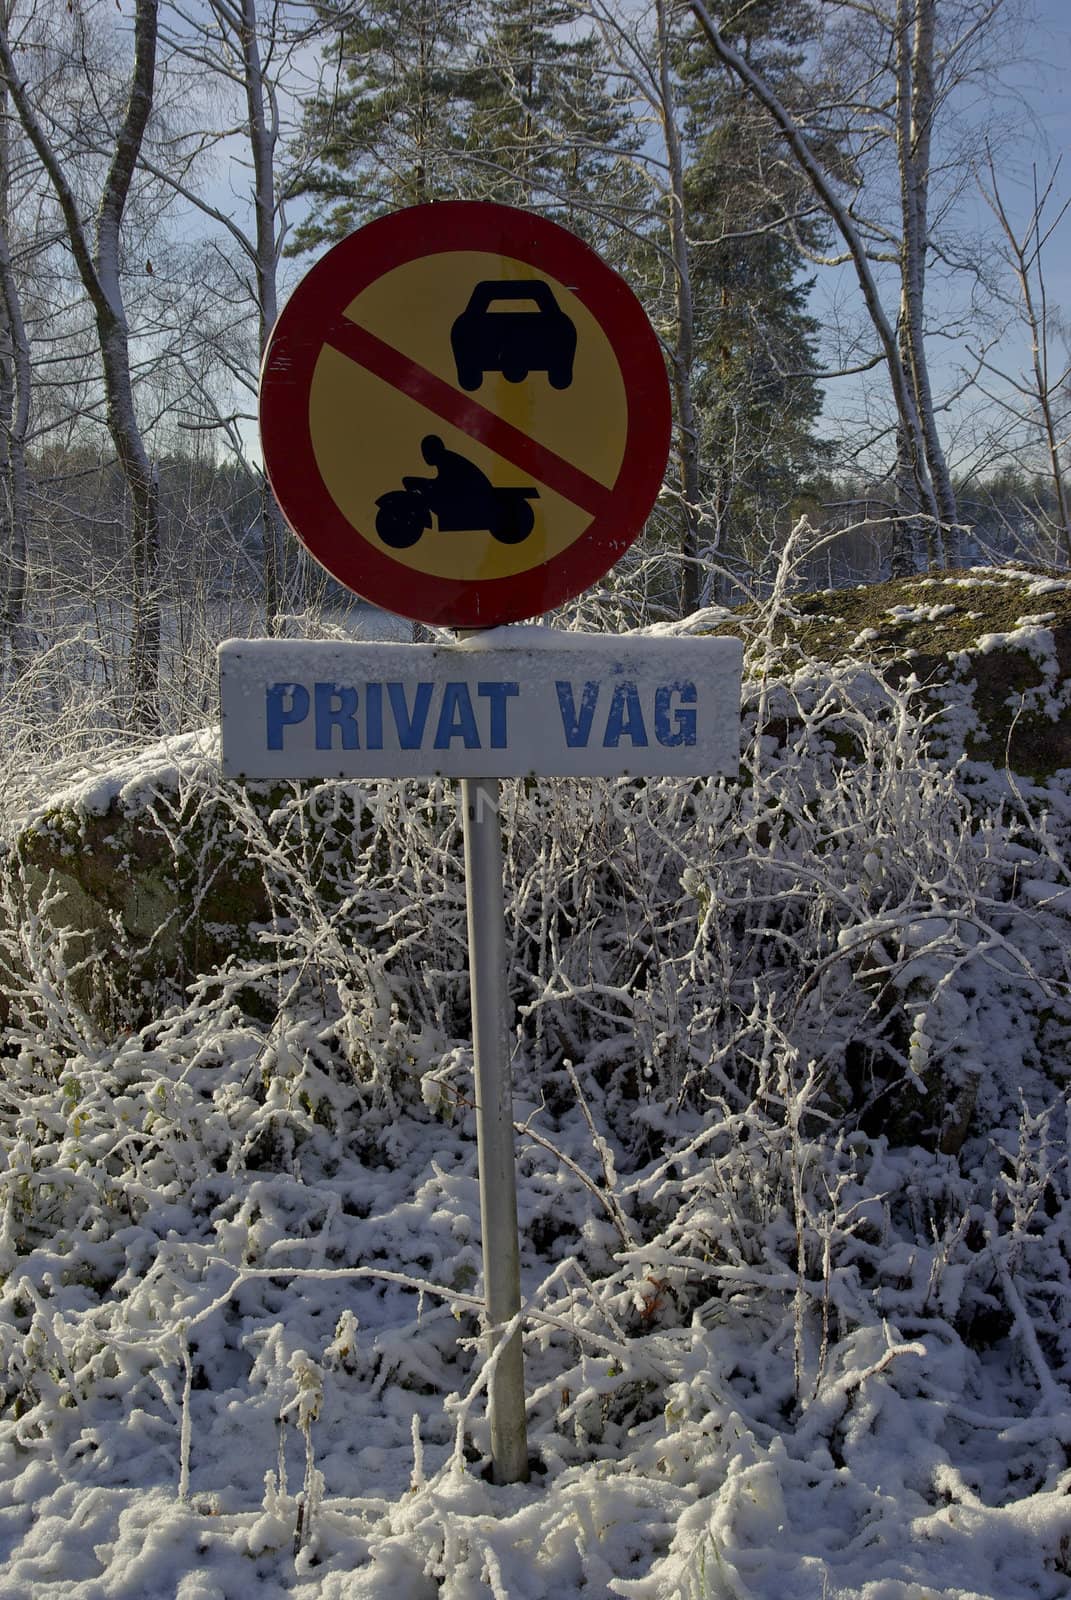 A sign saying "Private Road" in swedish a windter day.